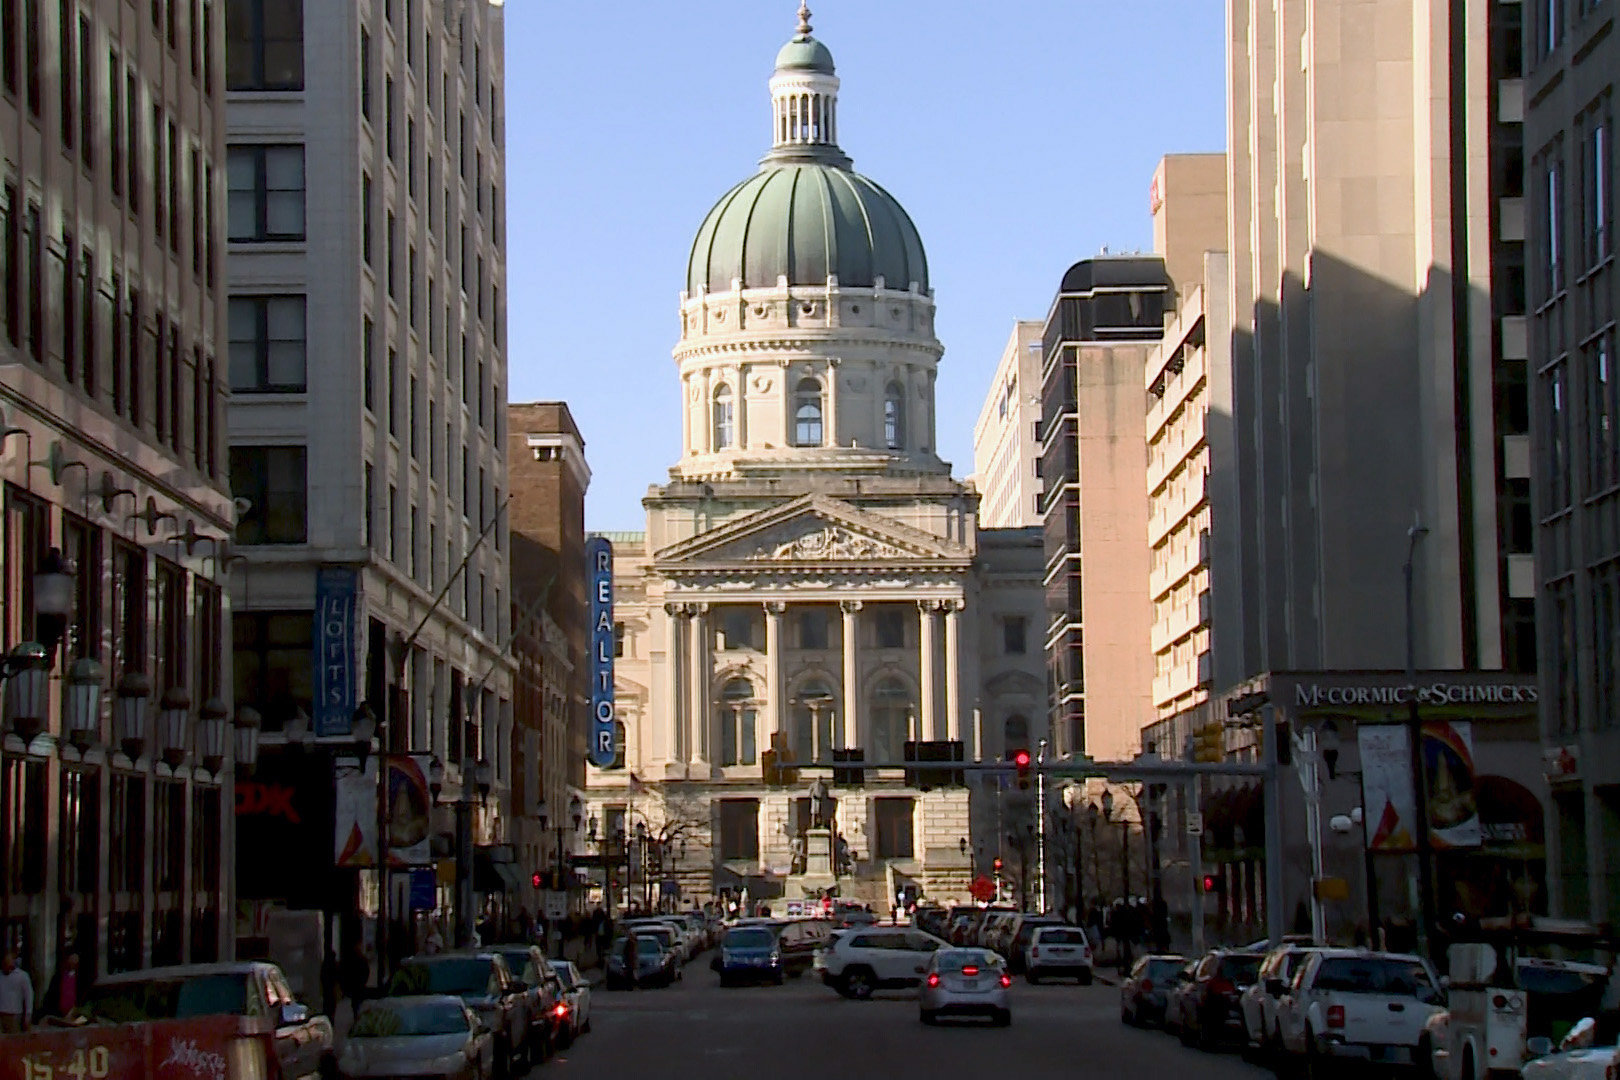 The statehouse in Indianapolis